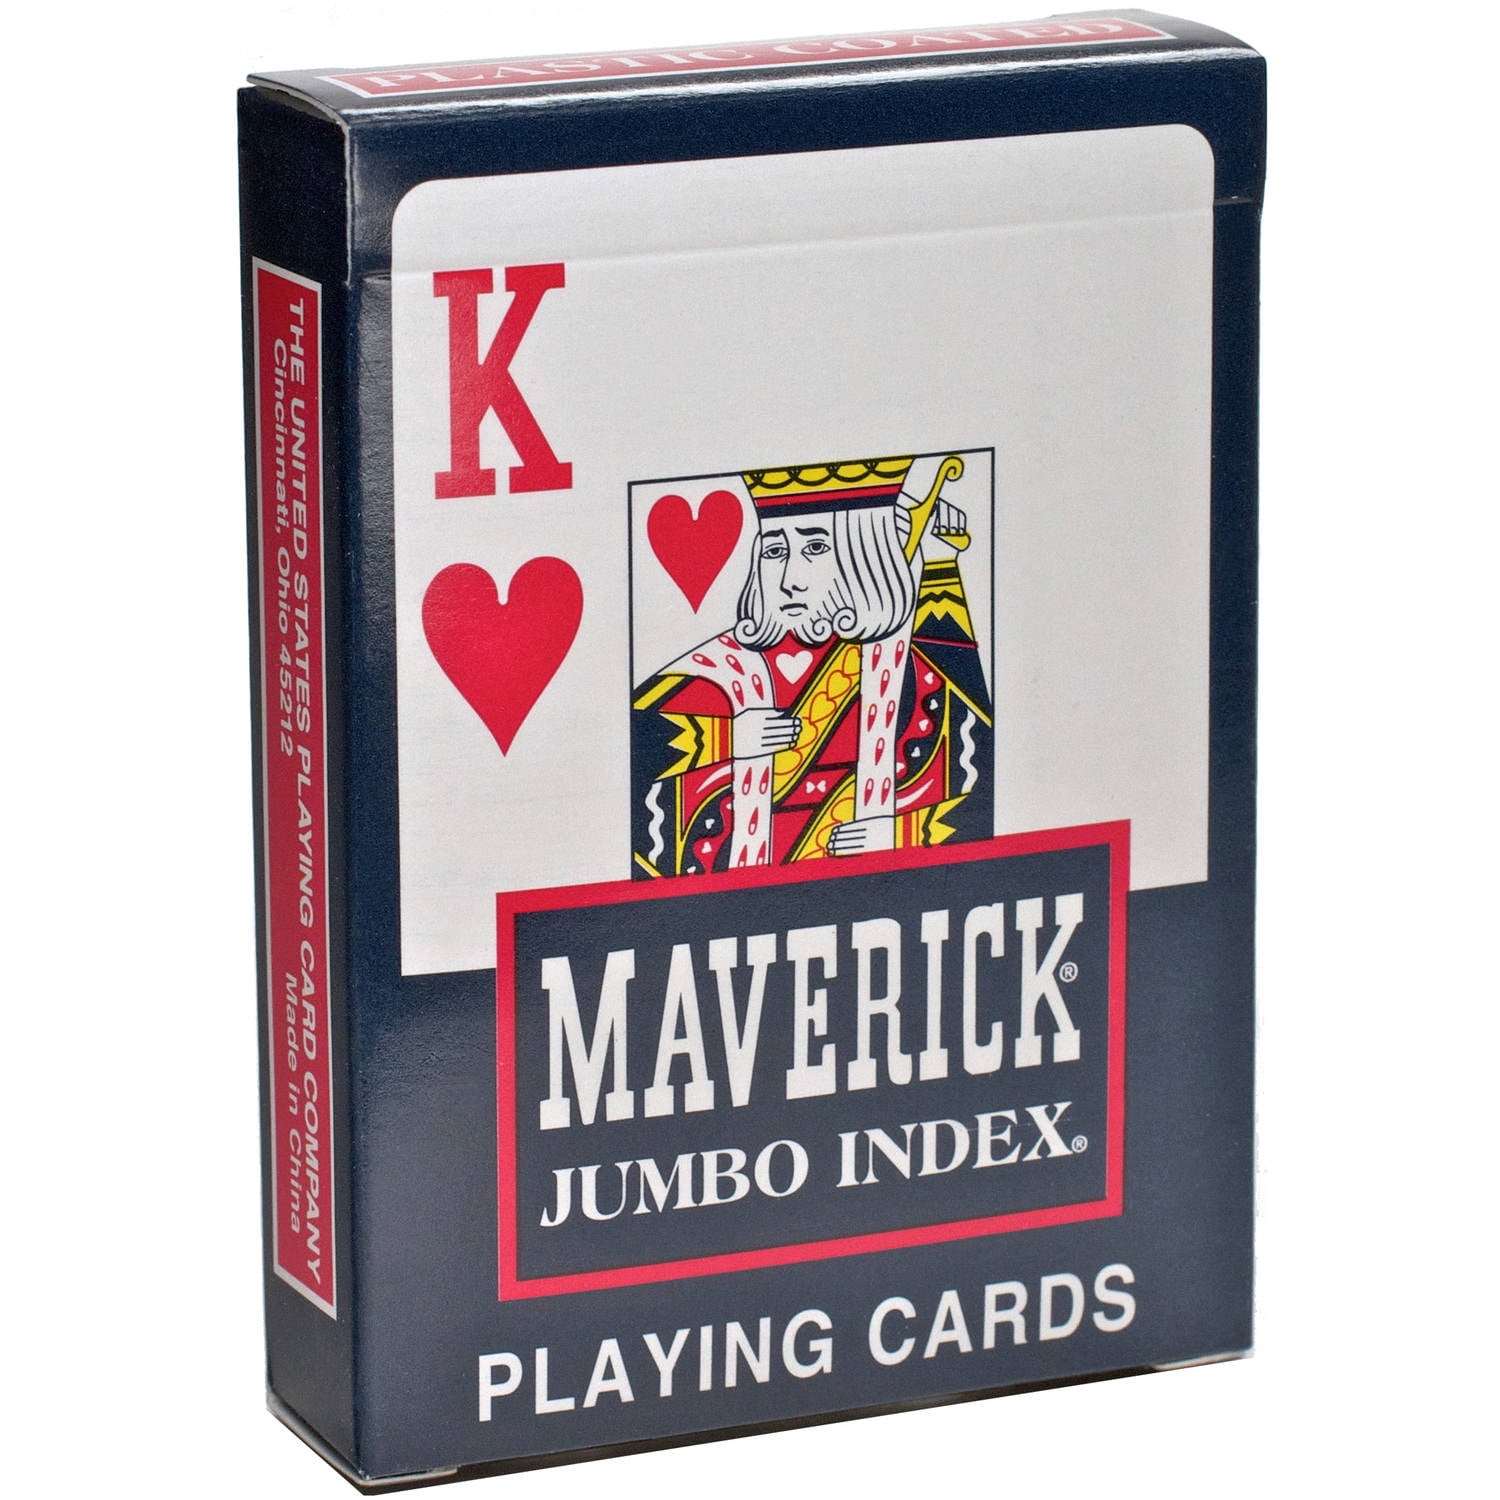 Details about   Maverick Jumbo Face Deck of Playing Cards No 1206 HOYLE Products Factory Sealed 